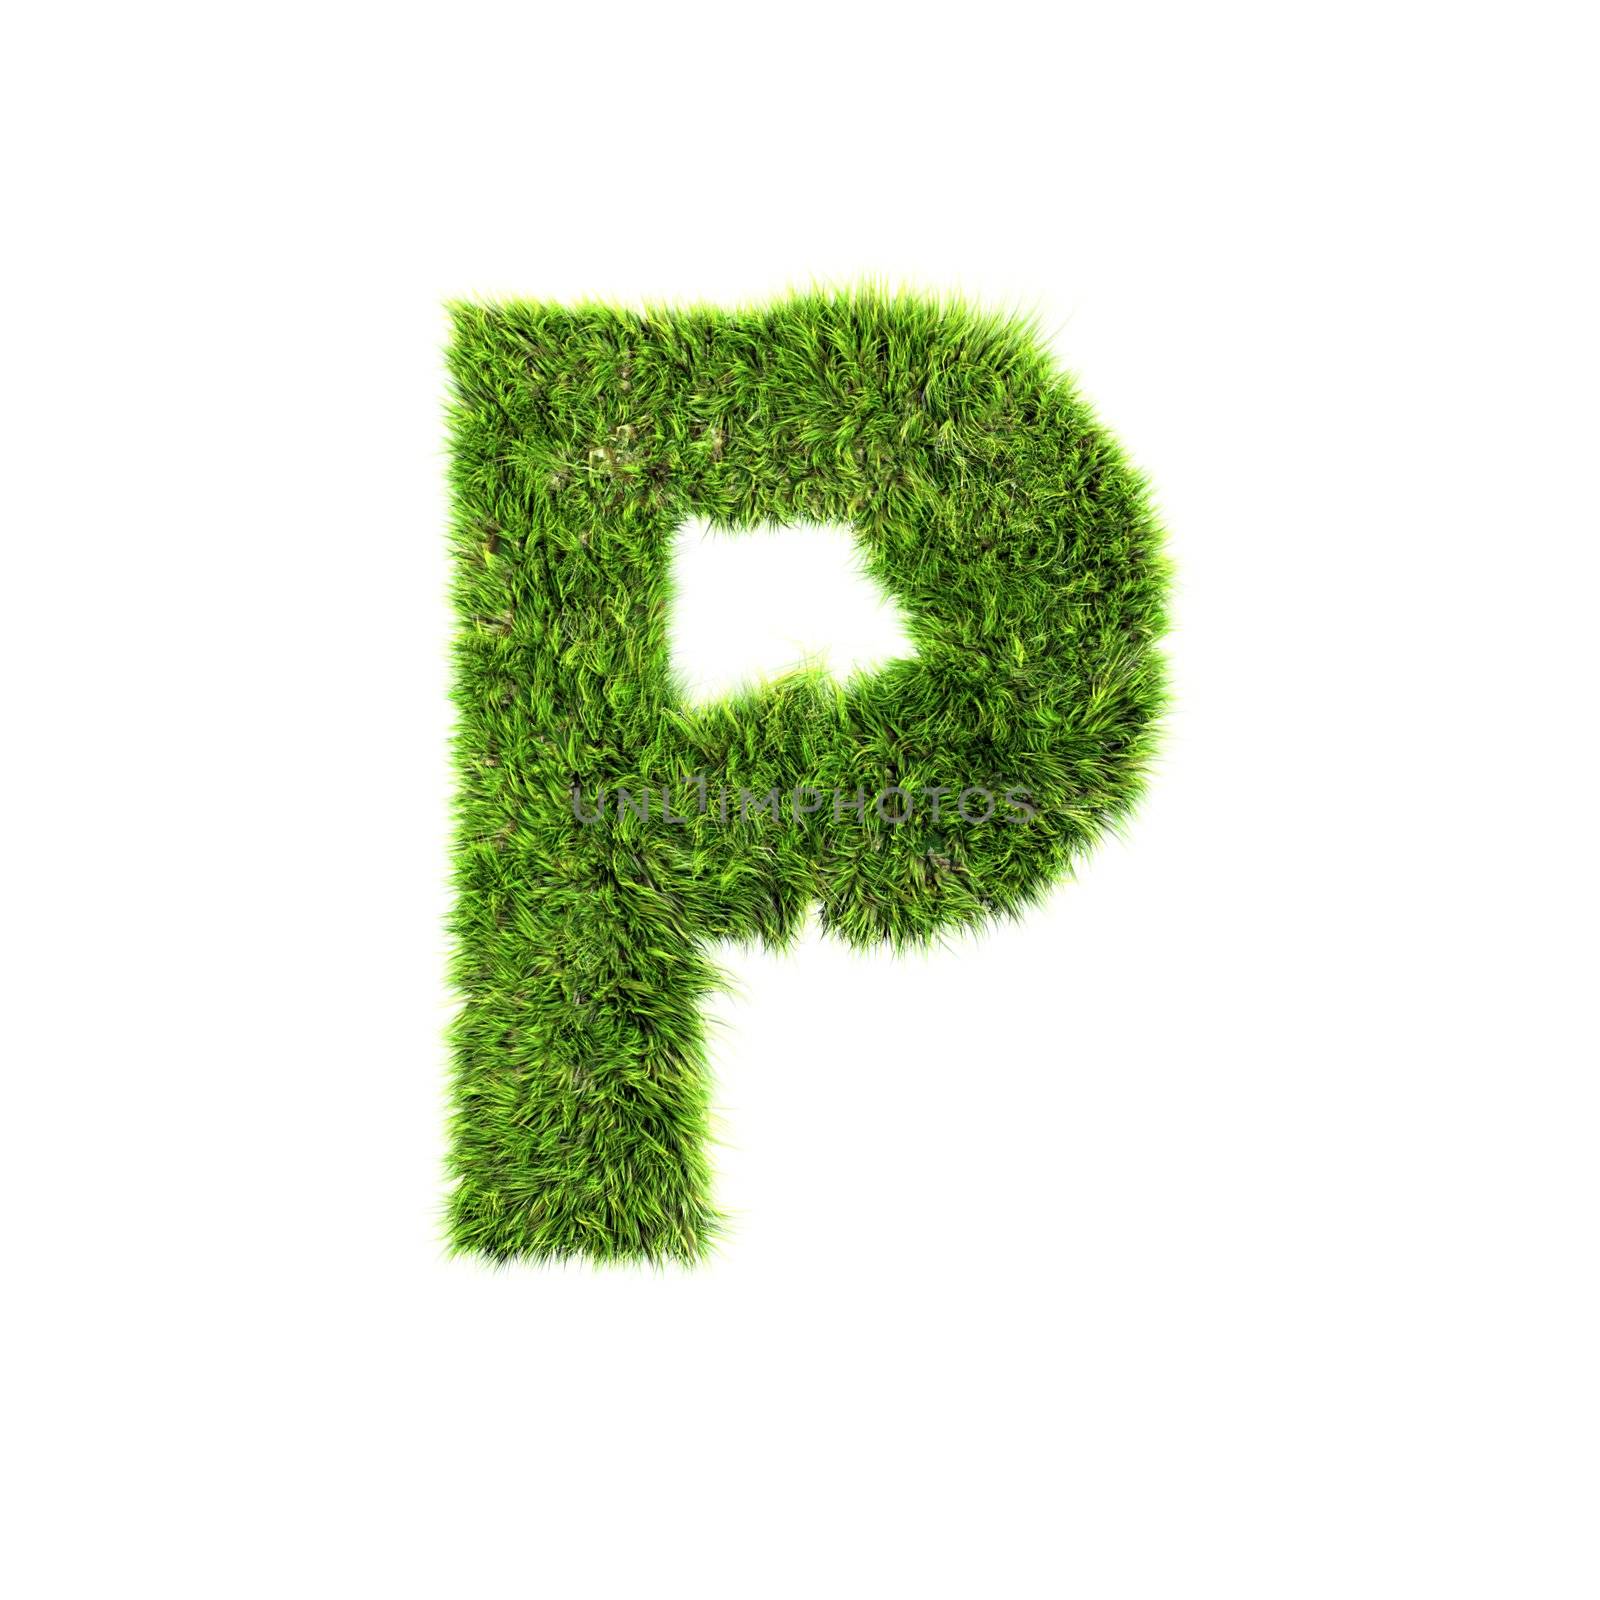 3d grass letter isolated on white background - P by chrisroll